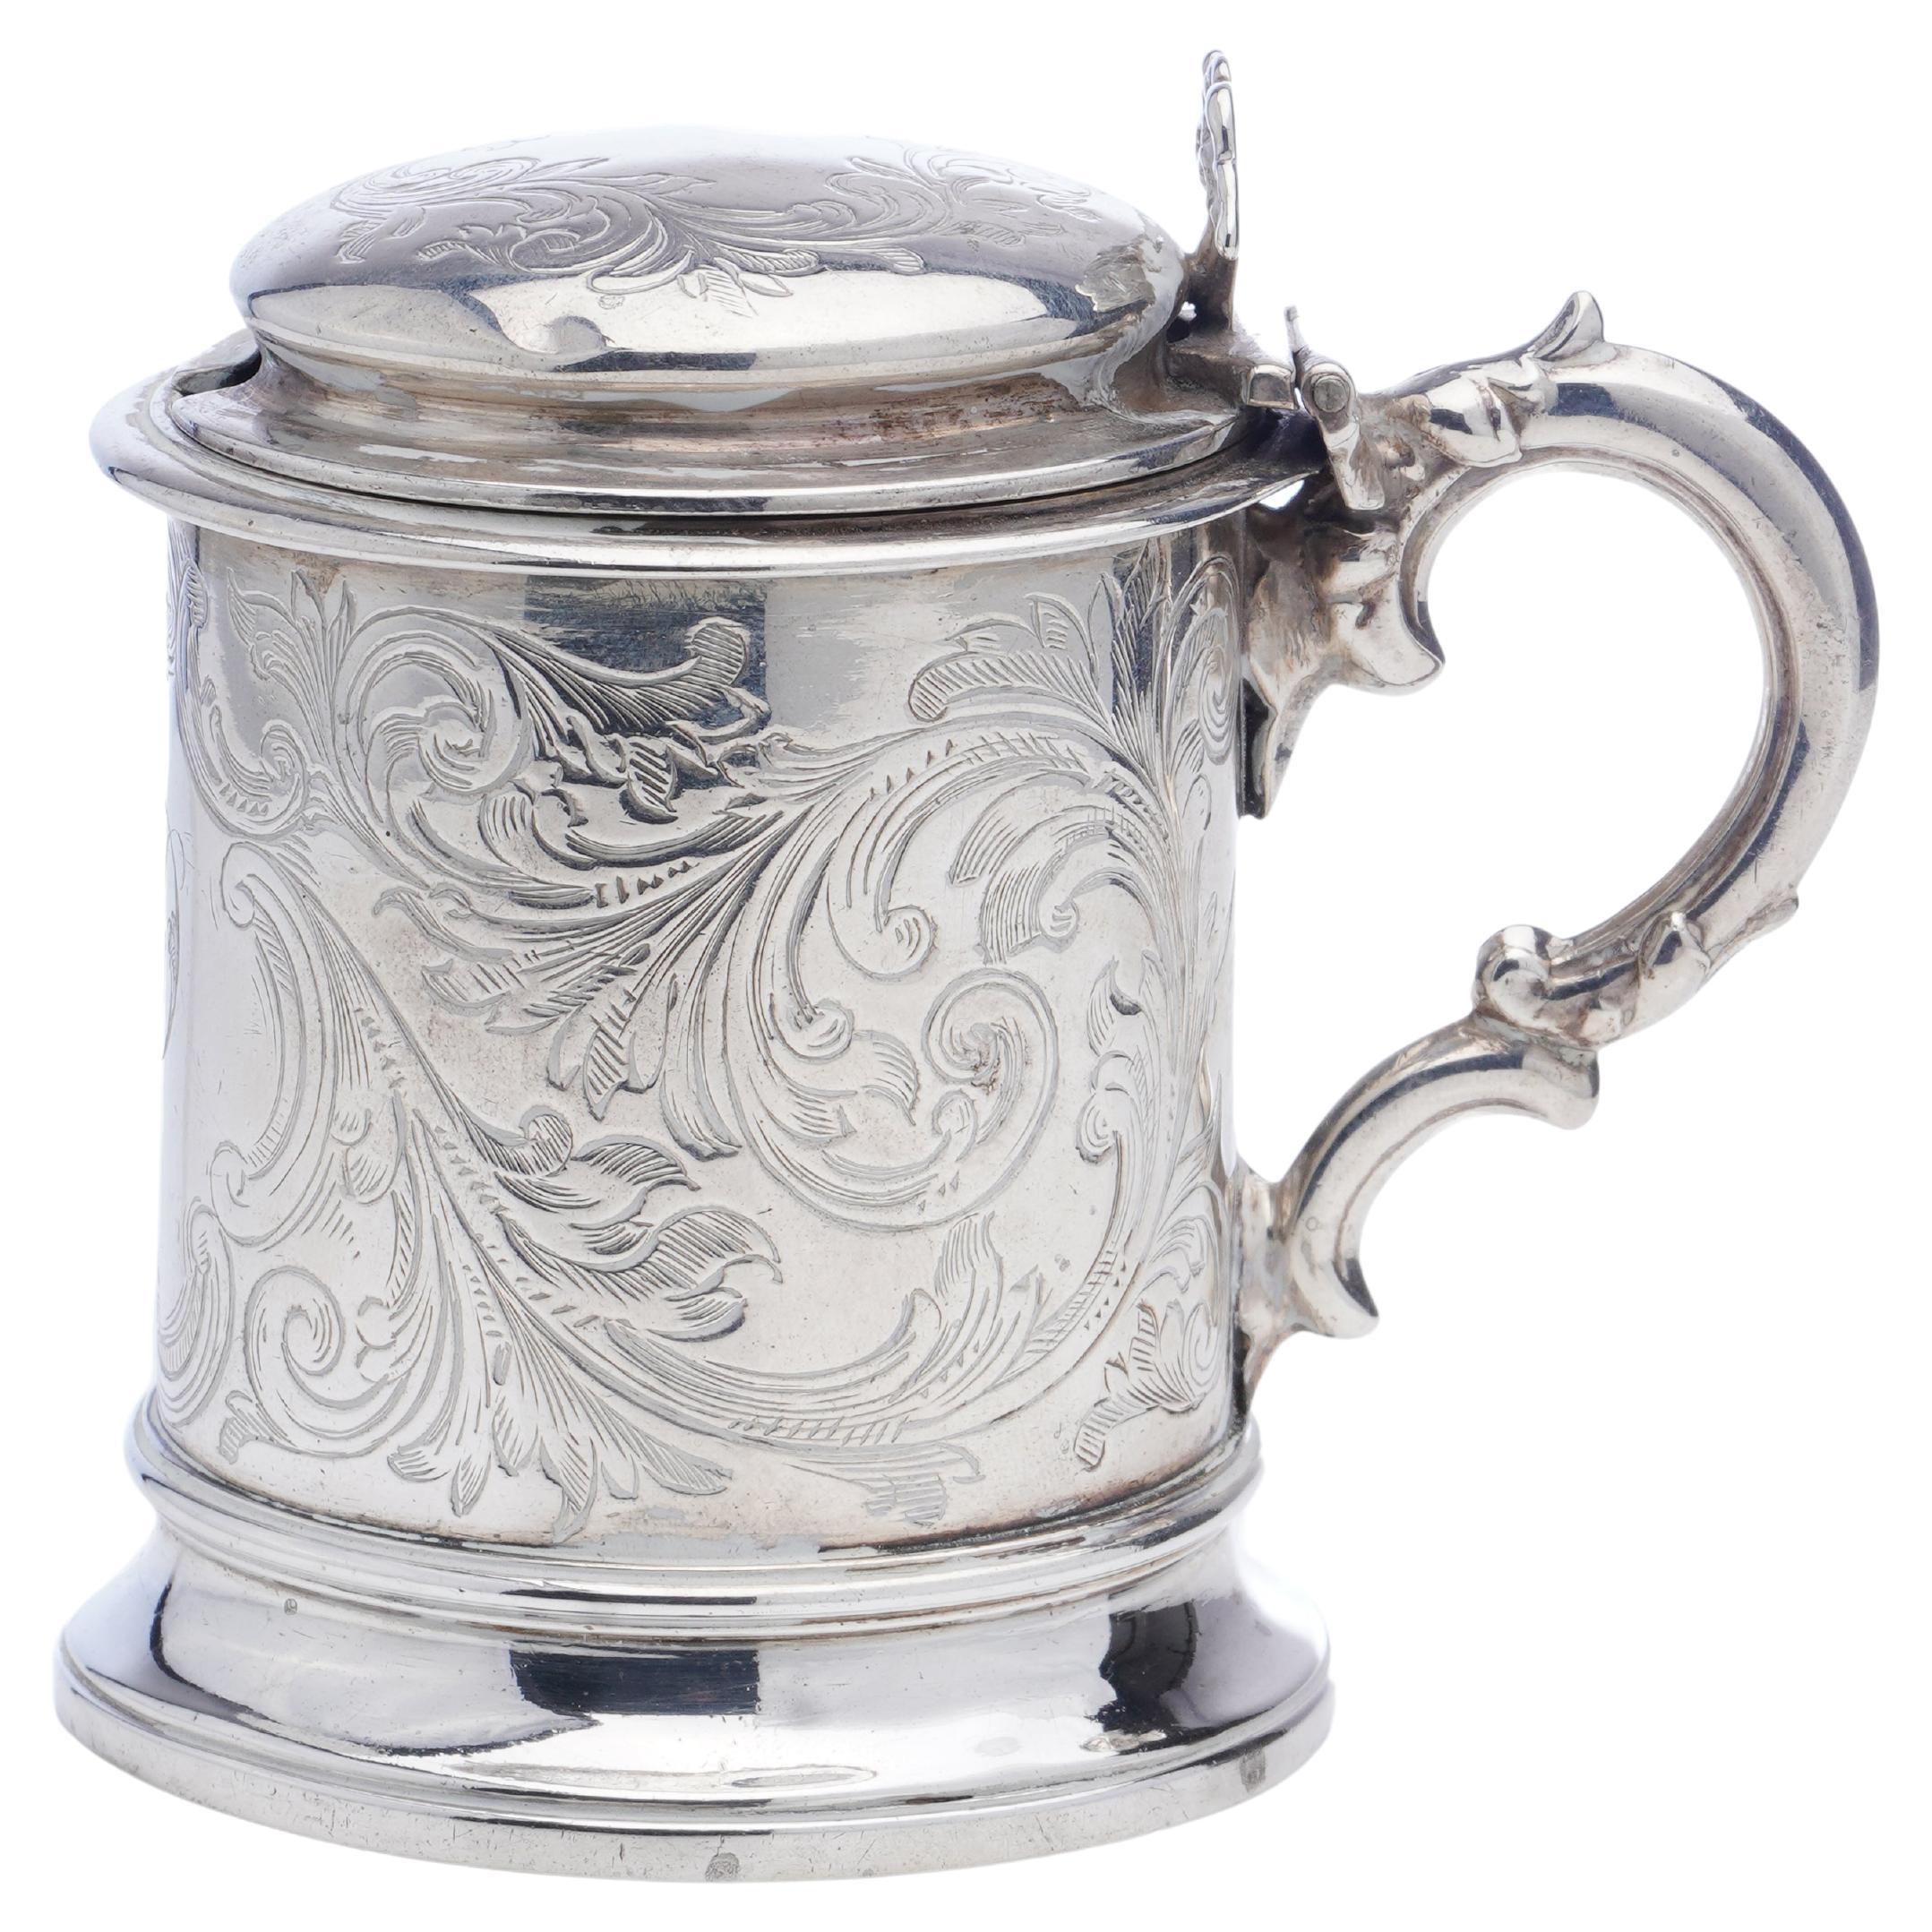 Antique Victorian Sterling Silver Mustard Pot with Lid